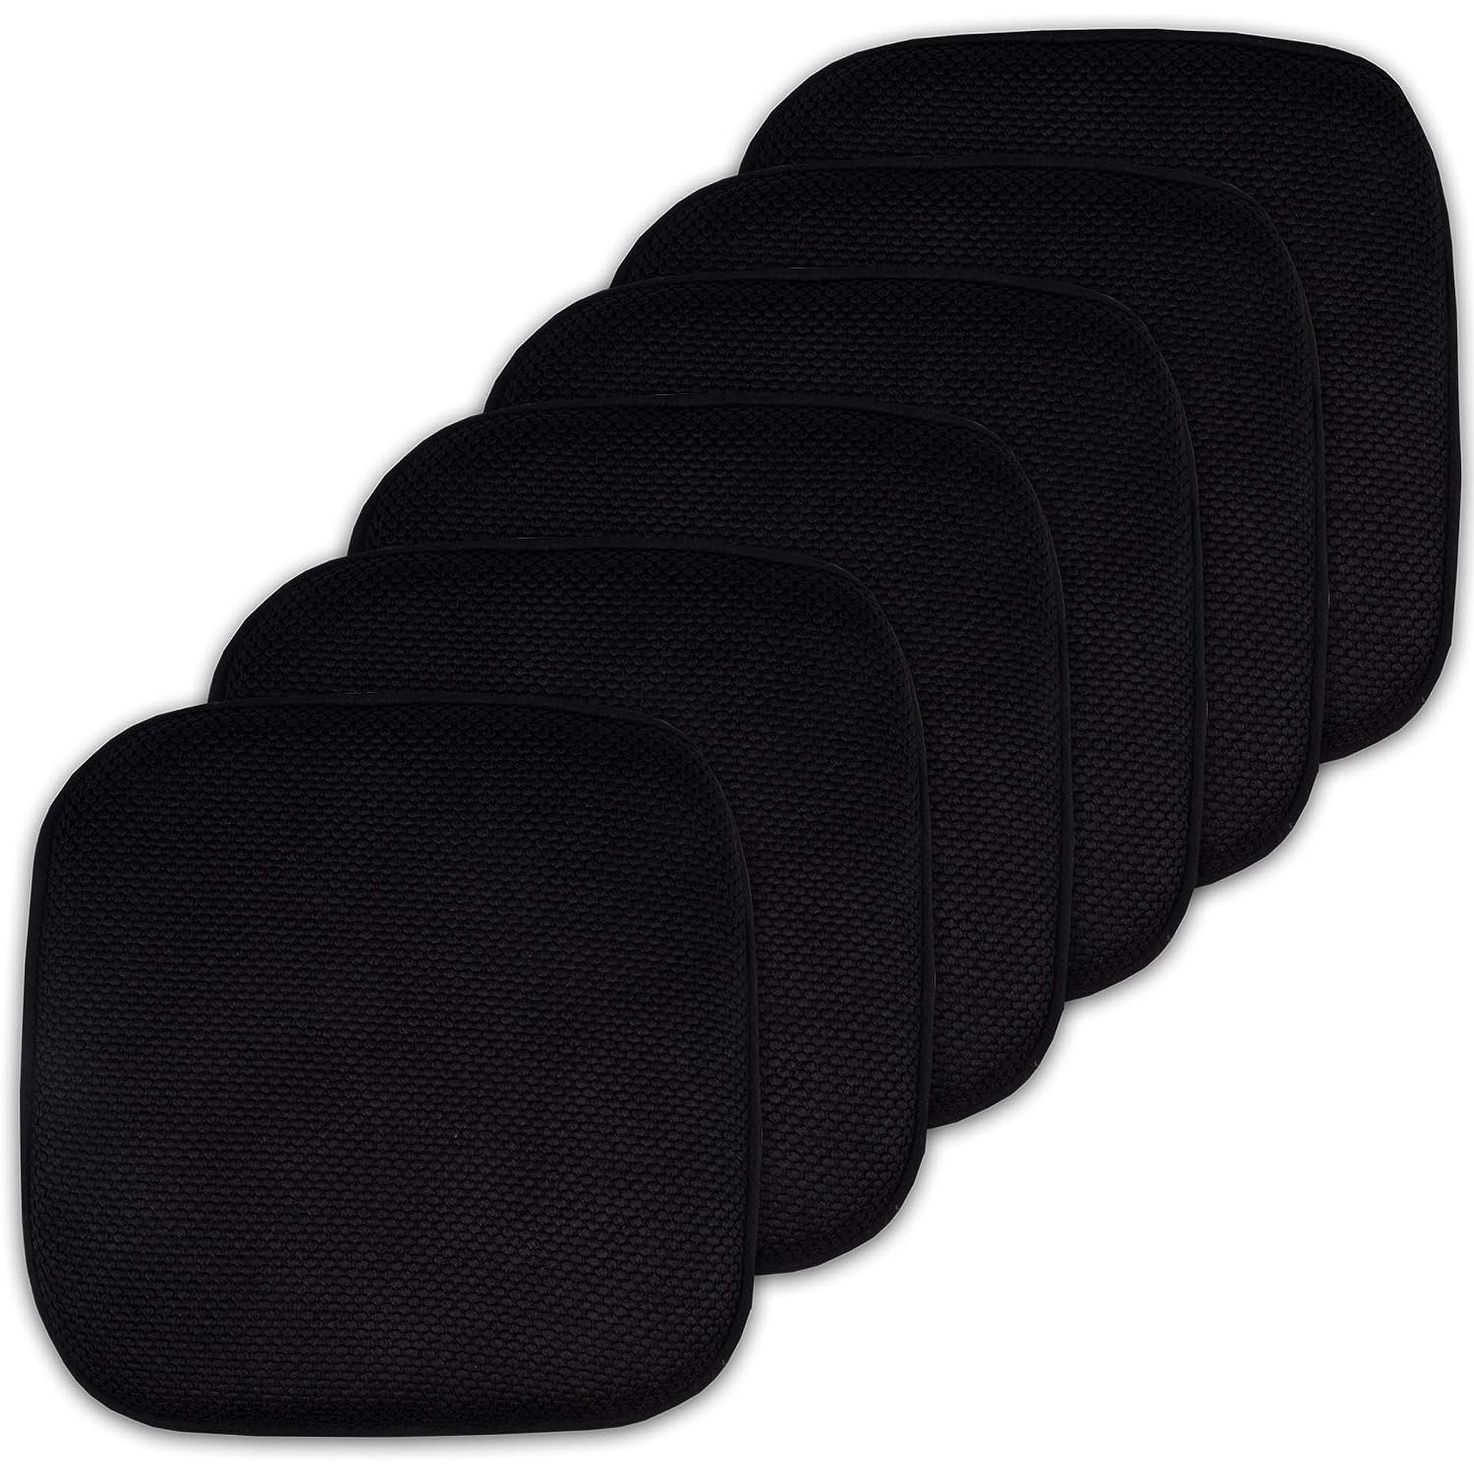 https://ak1.ostkcdn.com/images/products/is/images/direct/7b4536e2b074a21c19684ba9a4156e956ea25121/6-Pack-Cushion-Memory-Foam-Chair-Pads-Honeycomb-Nonslip-Back-Seat-Cover.jpg